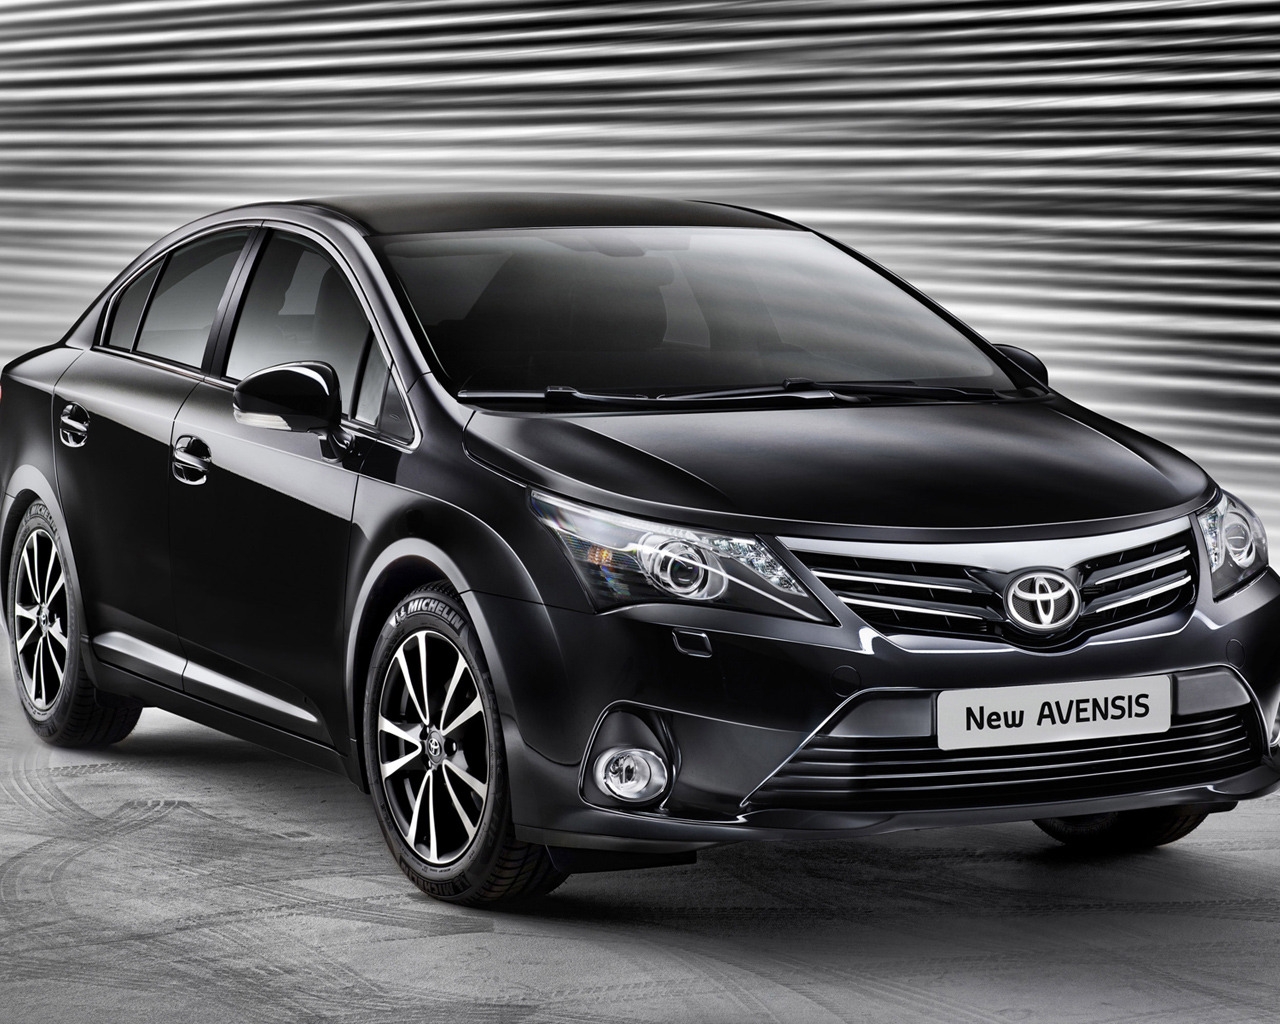 2012 Toyota Avensis for 1280 x 1024 resolution